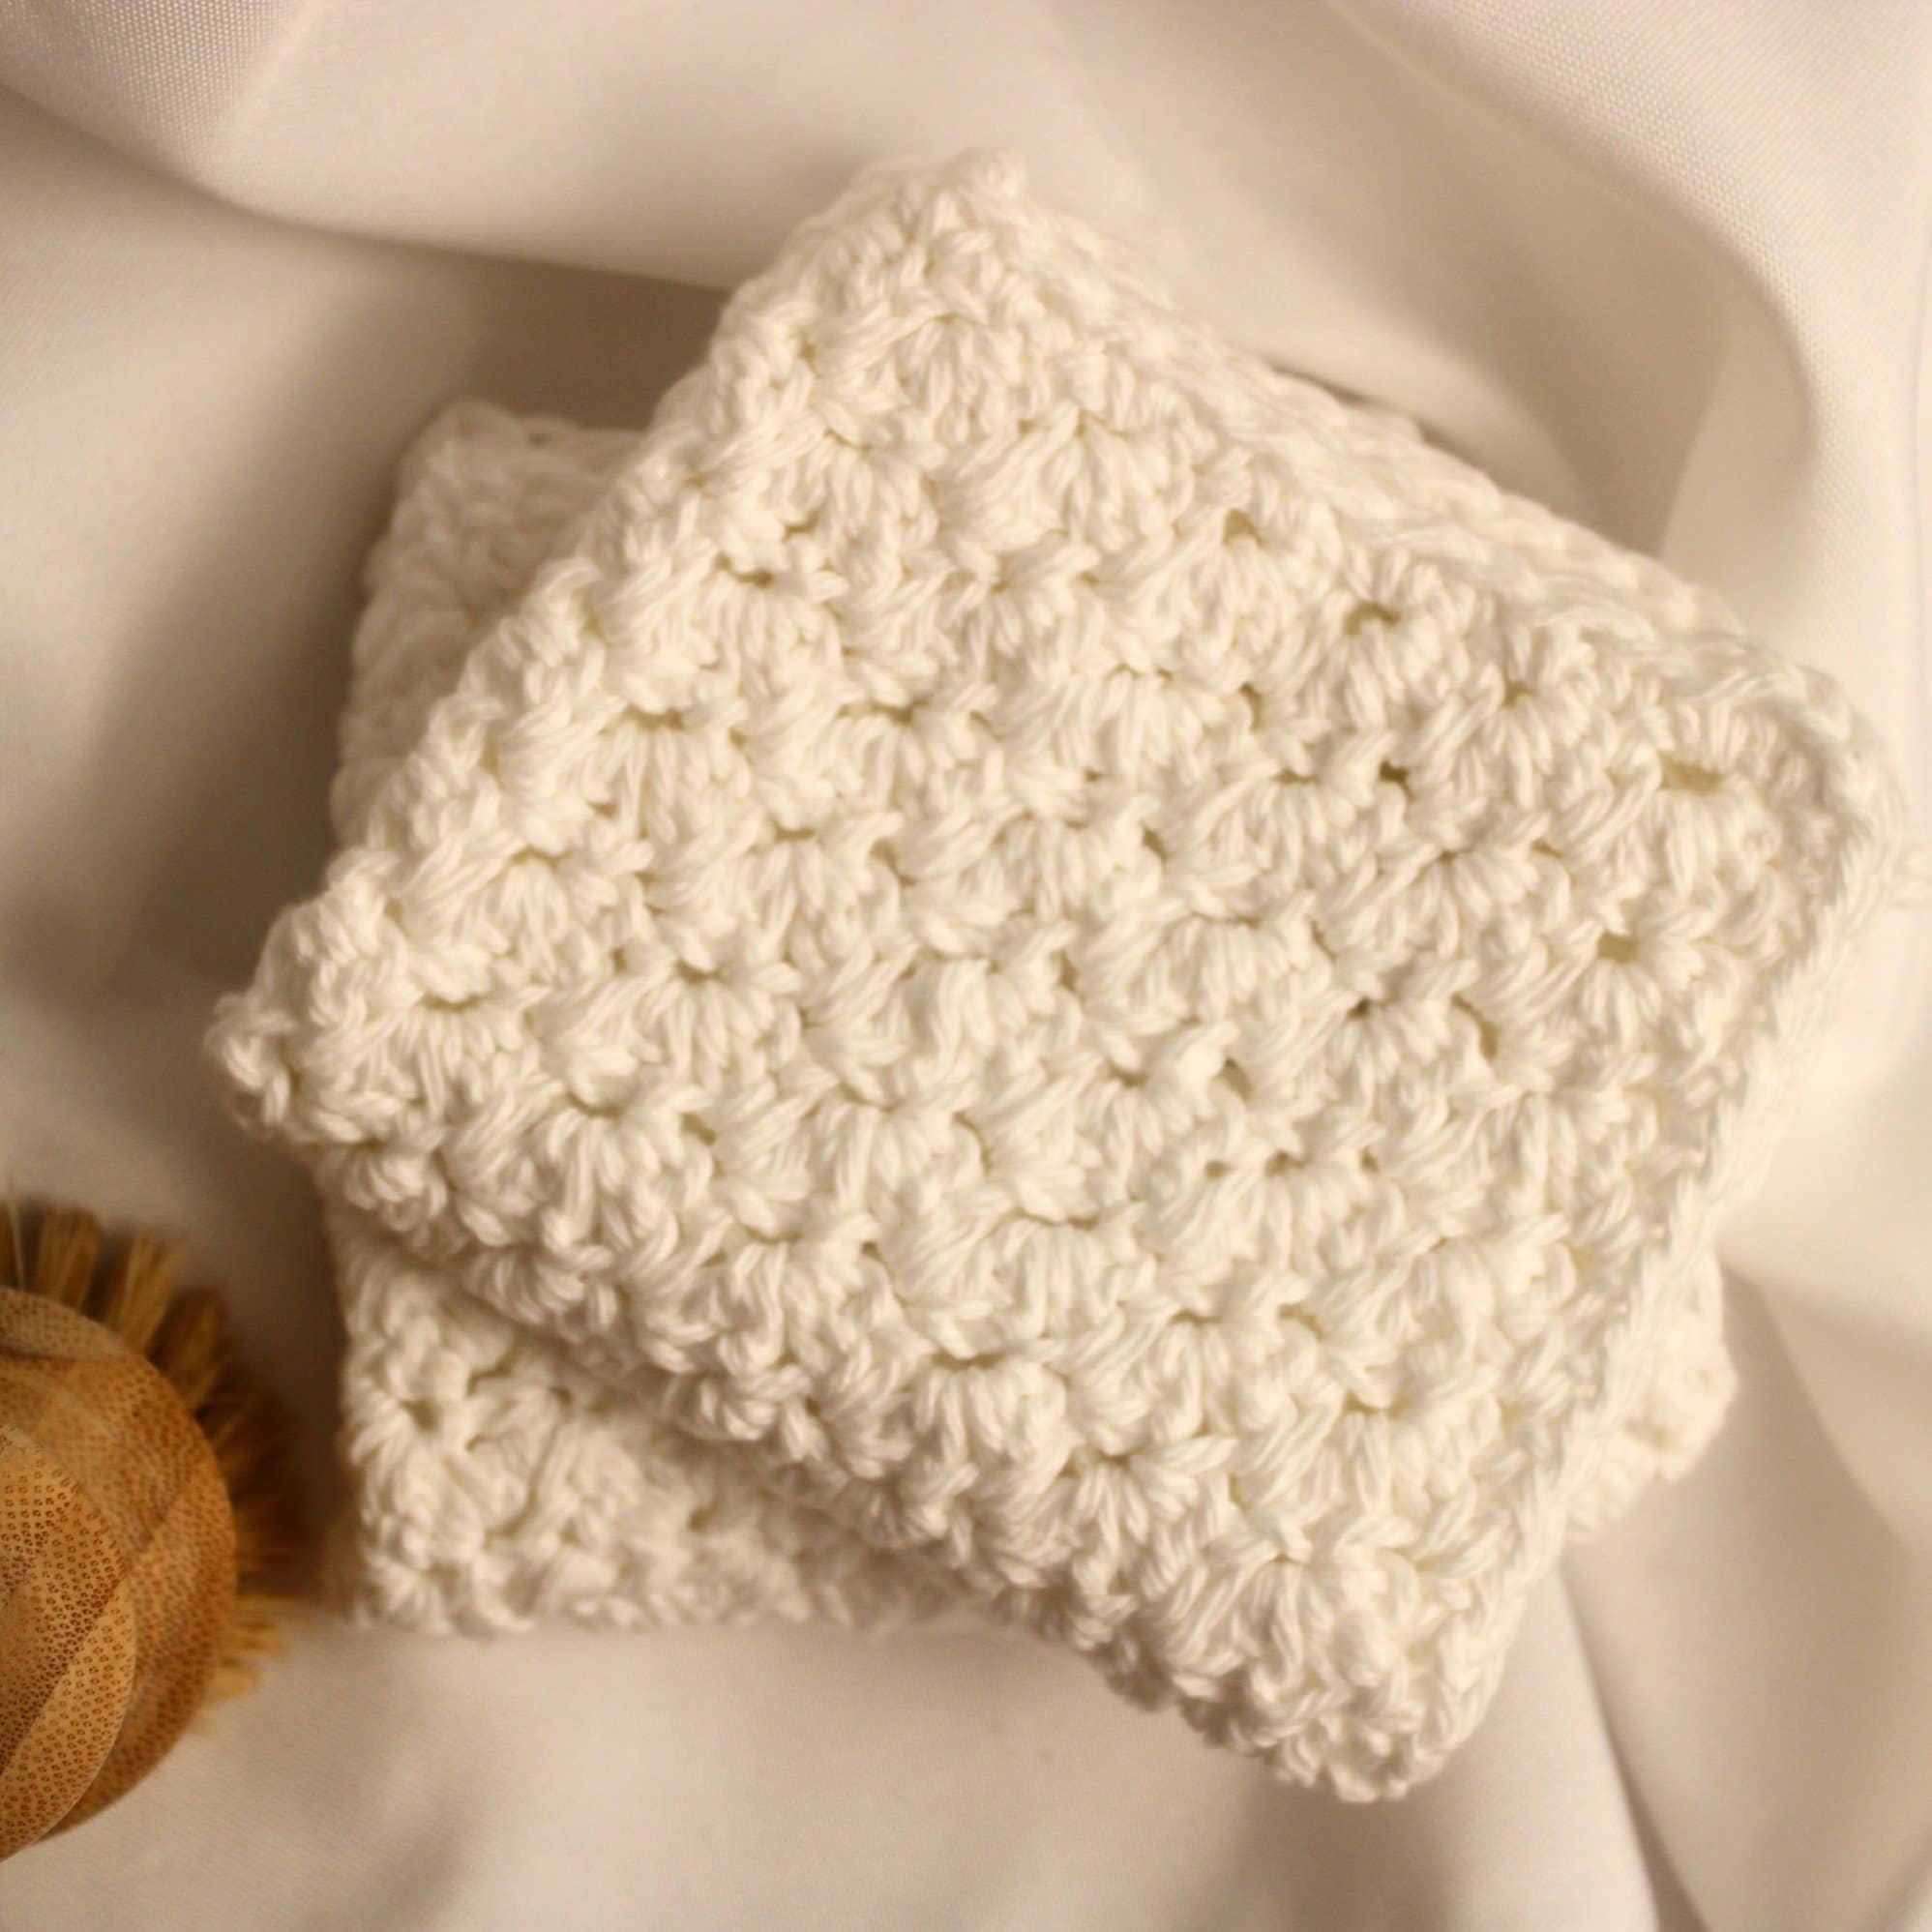 How to Crochet the Waffle Stitch - Avery Lane Creations